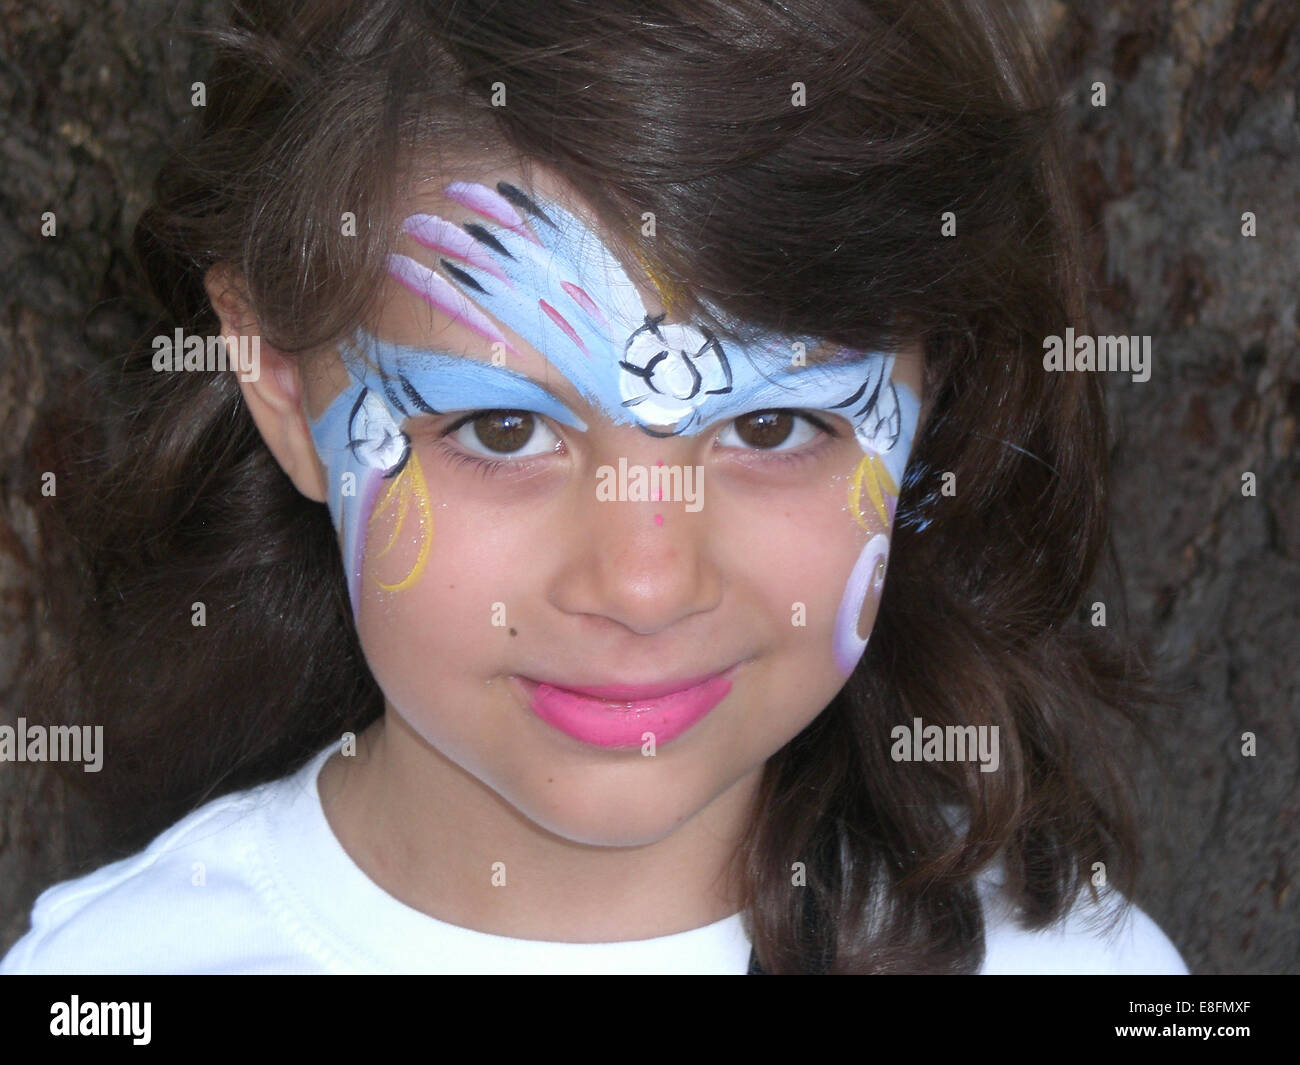 Girl (12-13) with face paint Stock Photo